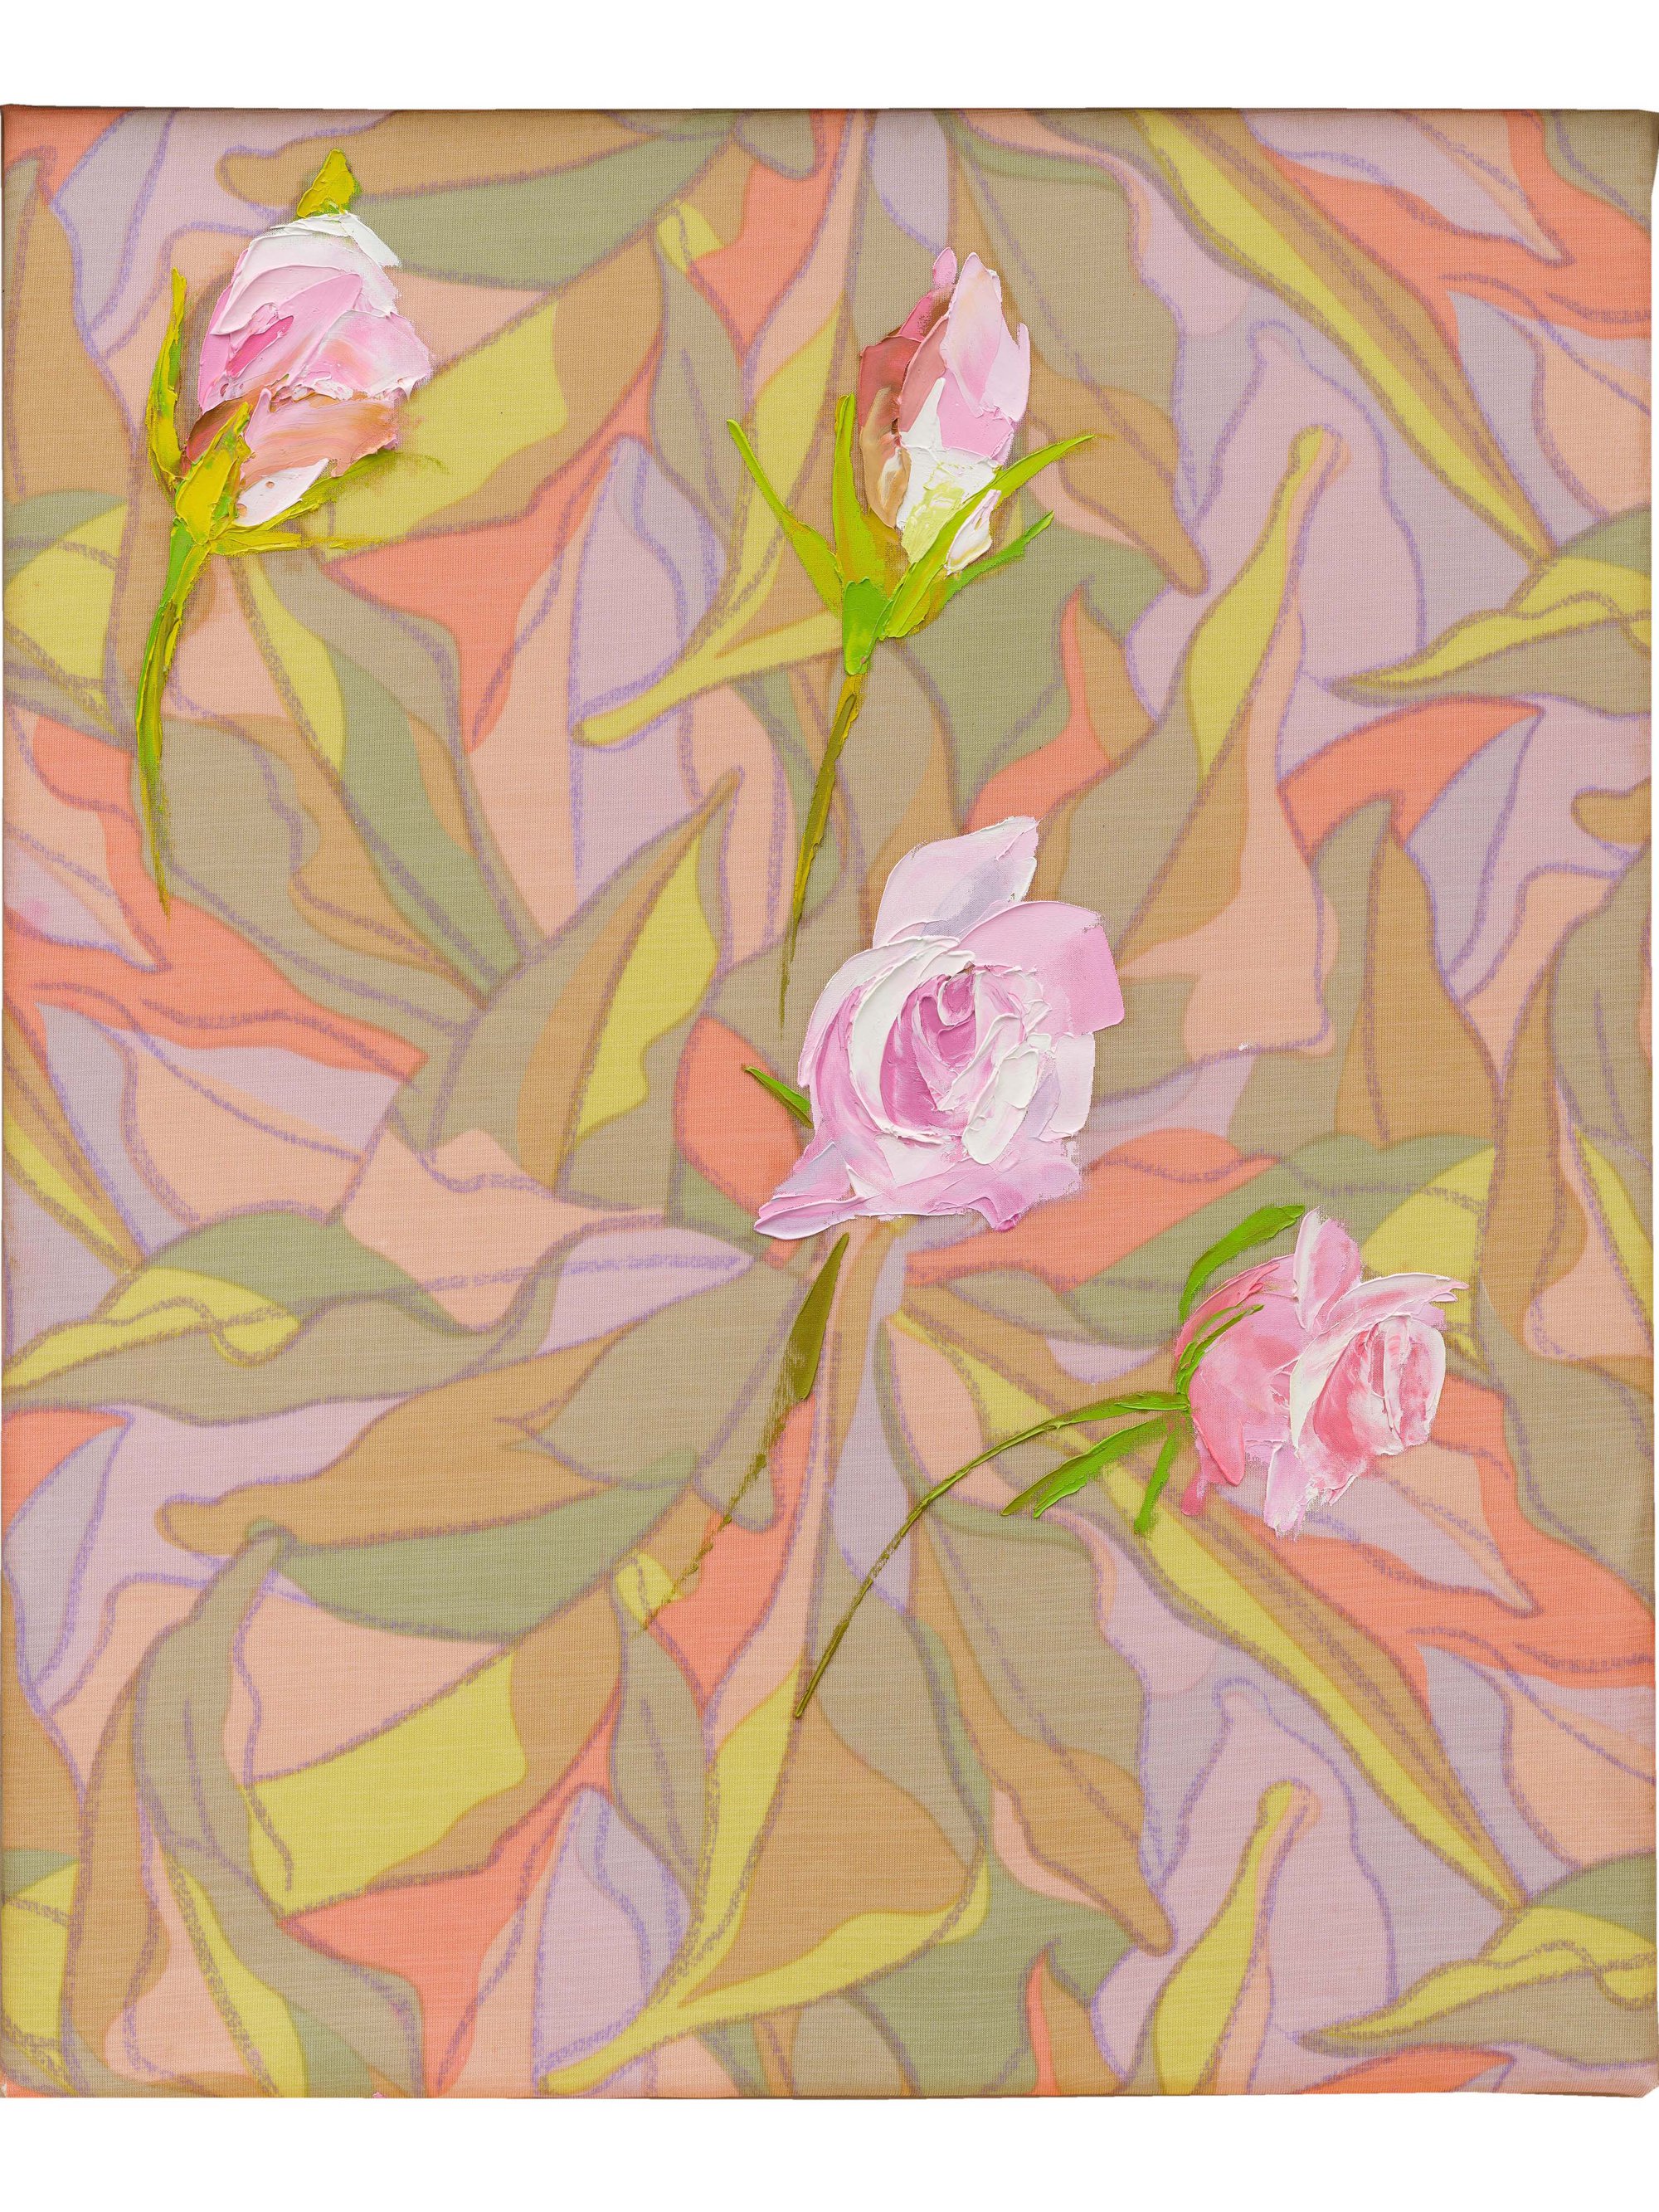 Bernat Klein, “Pink favourite” Roses, oil on screen printed knitted jersey polyester (Diolen), 65 x 57 cm (25 5/8 x 22 1/2 in), 1999